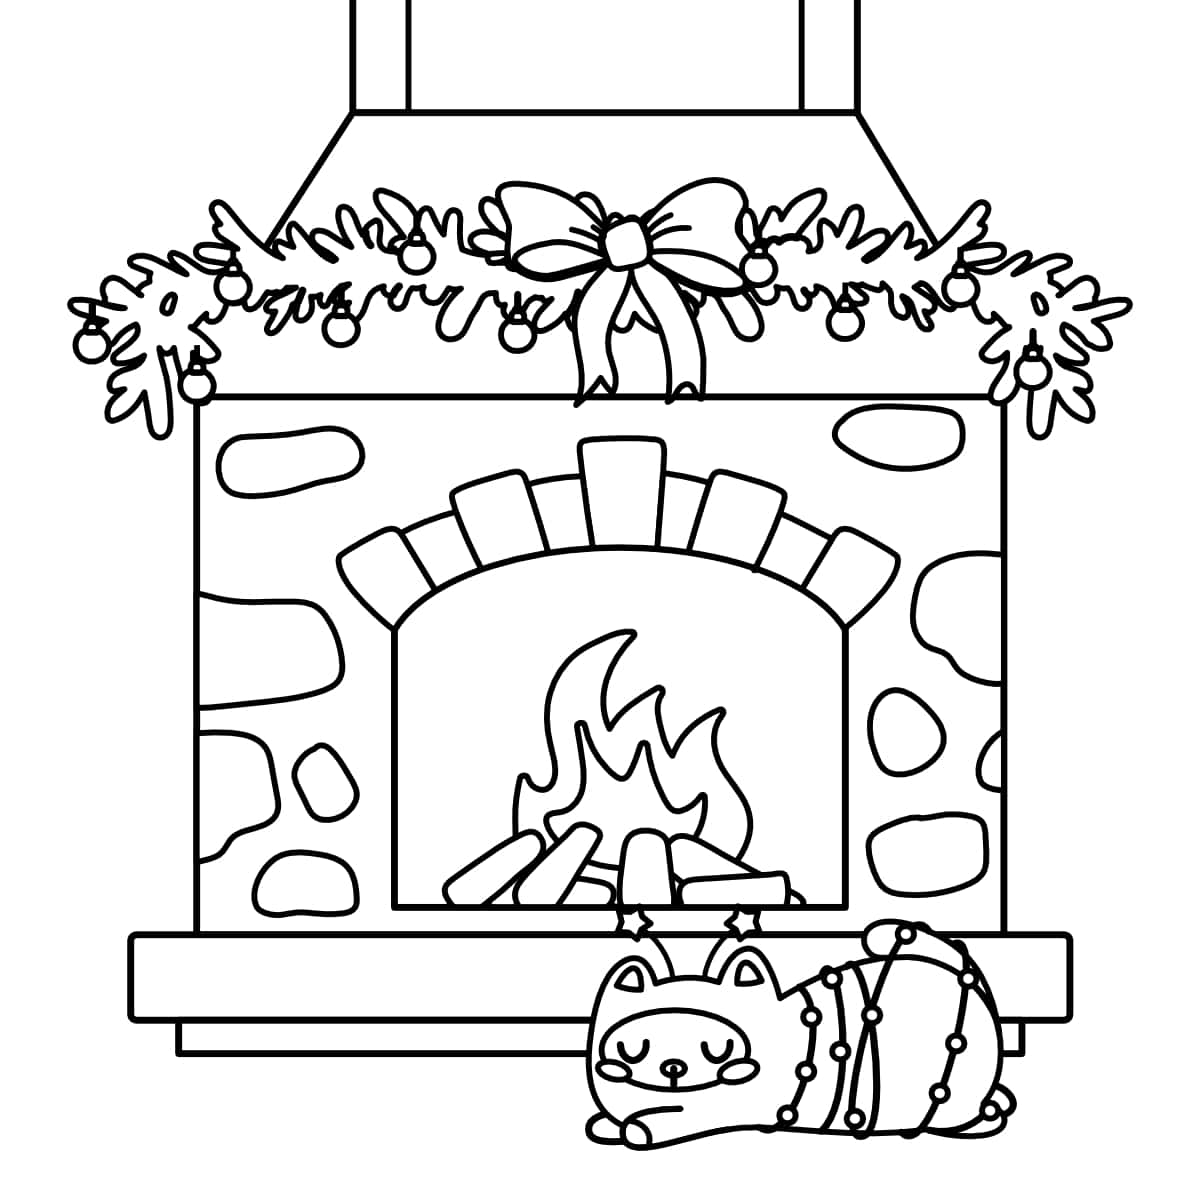 Fireplace coloring page of stone fireplace and a cat.